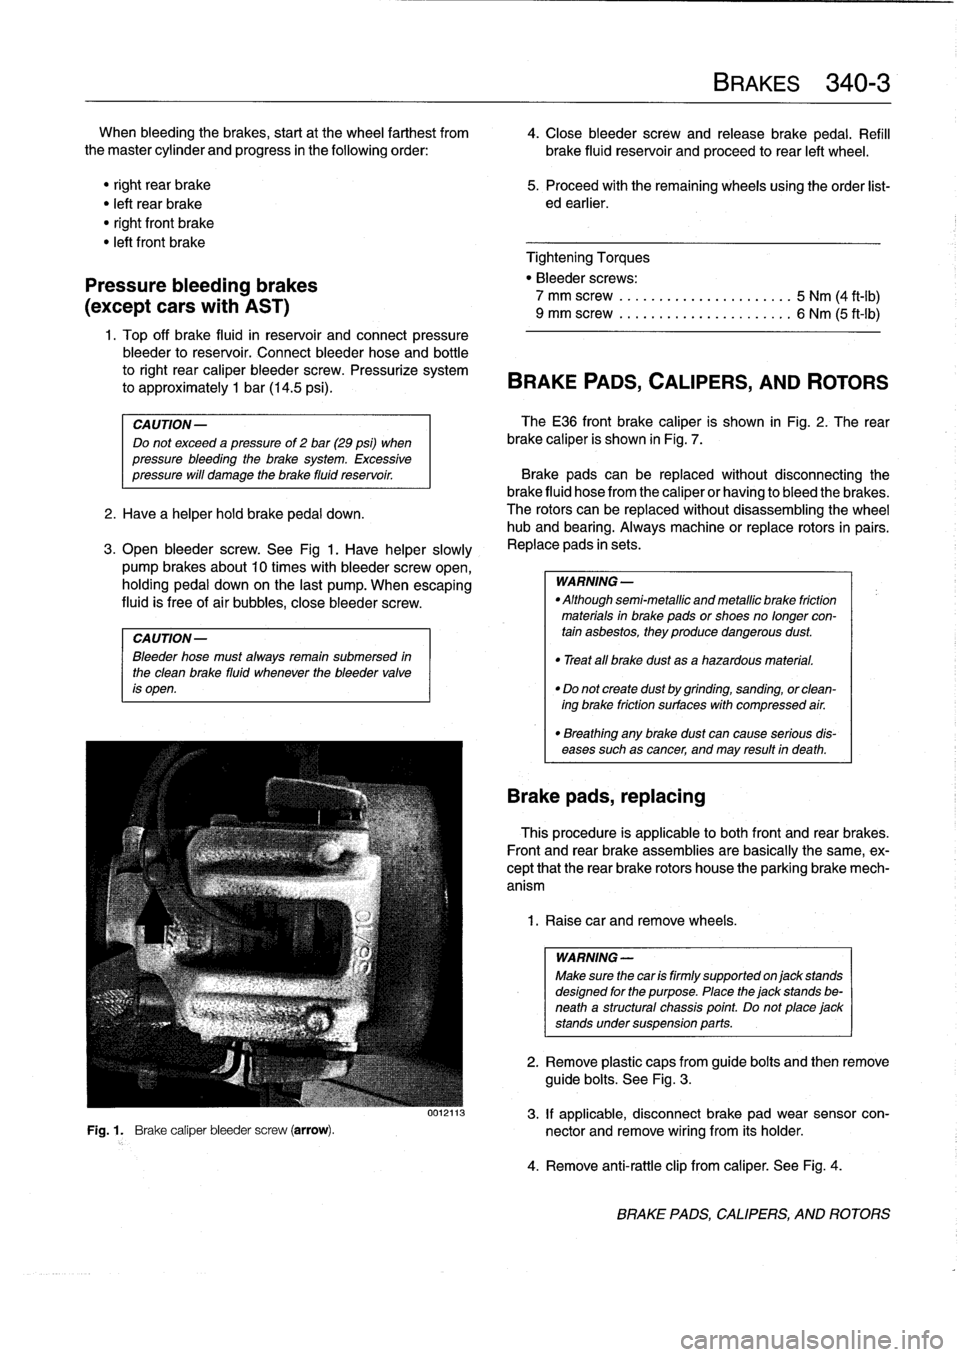 BMW 328i 1993 E36 Workshop Manual 
When
bleeding
the
brakes,
startat
the
wheel
farthest
from

	

4
.
Close
bleeder
screw
and
release
brake
pedal
.
Refill
the
master
cylinder
and
progress
in
the
following
order
:

	

brake
fluid
reserv